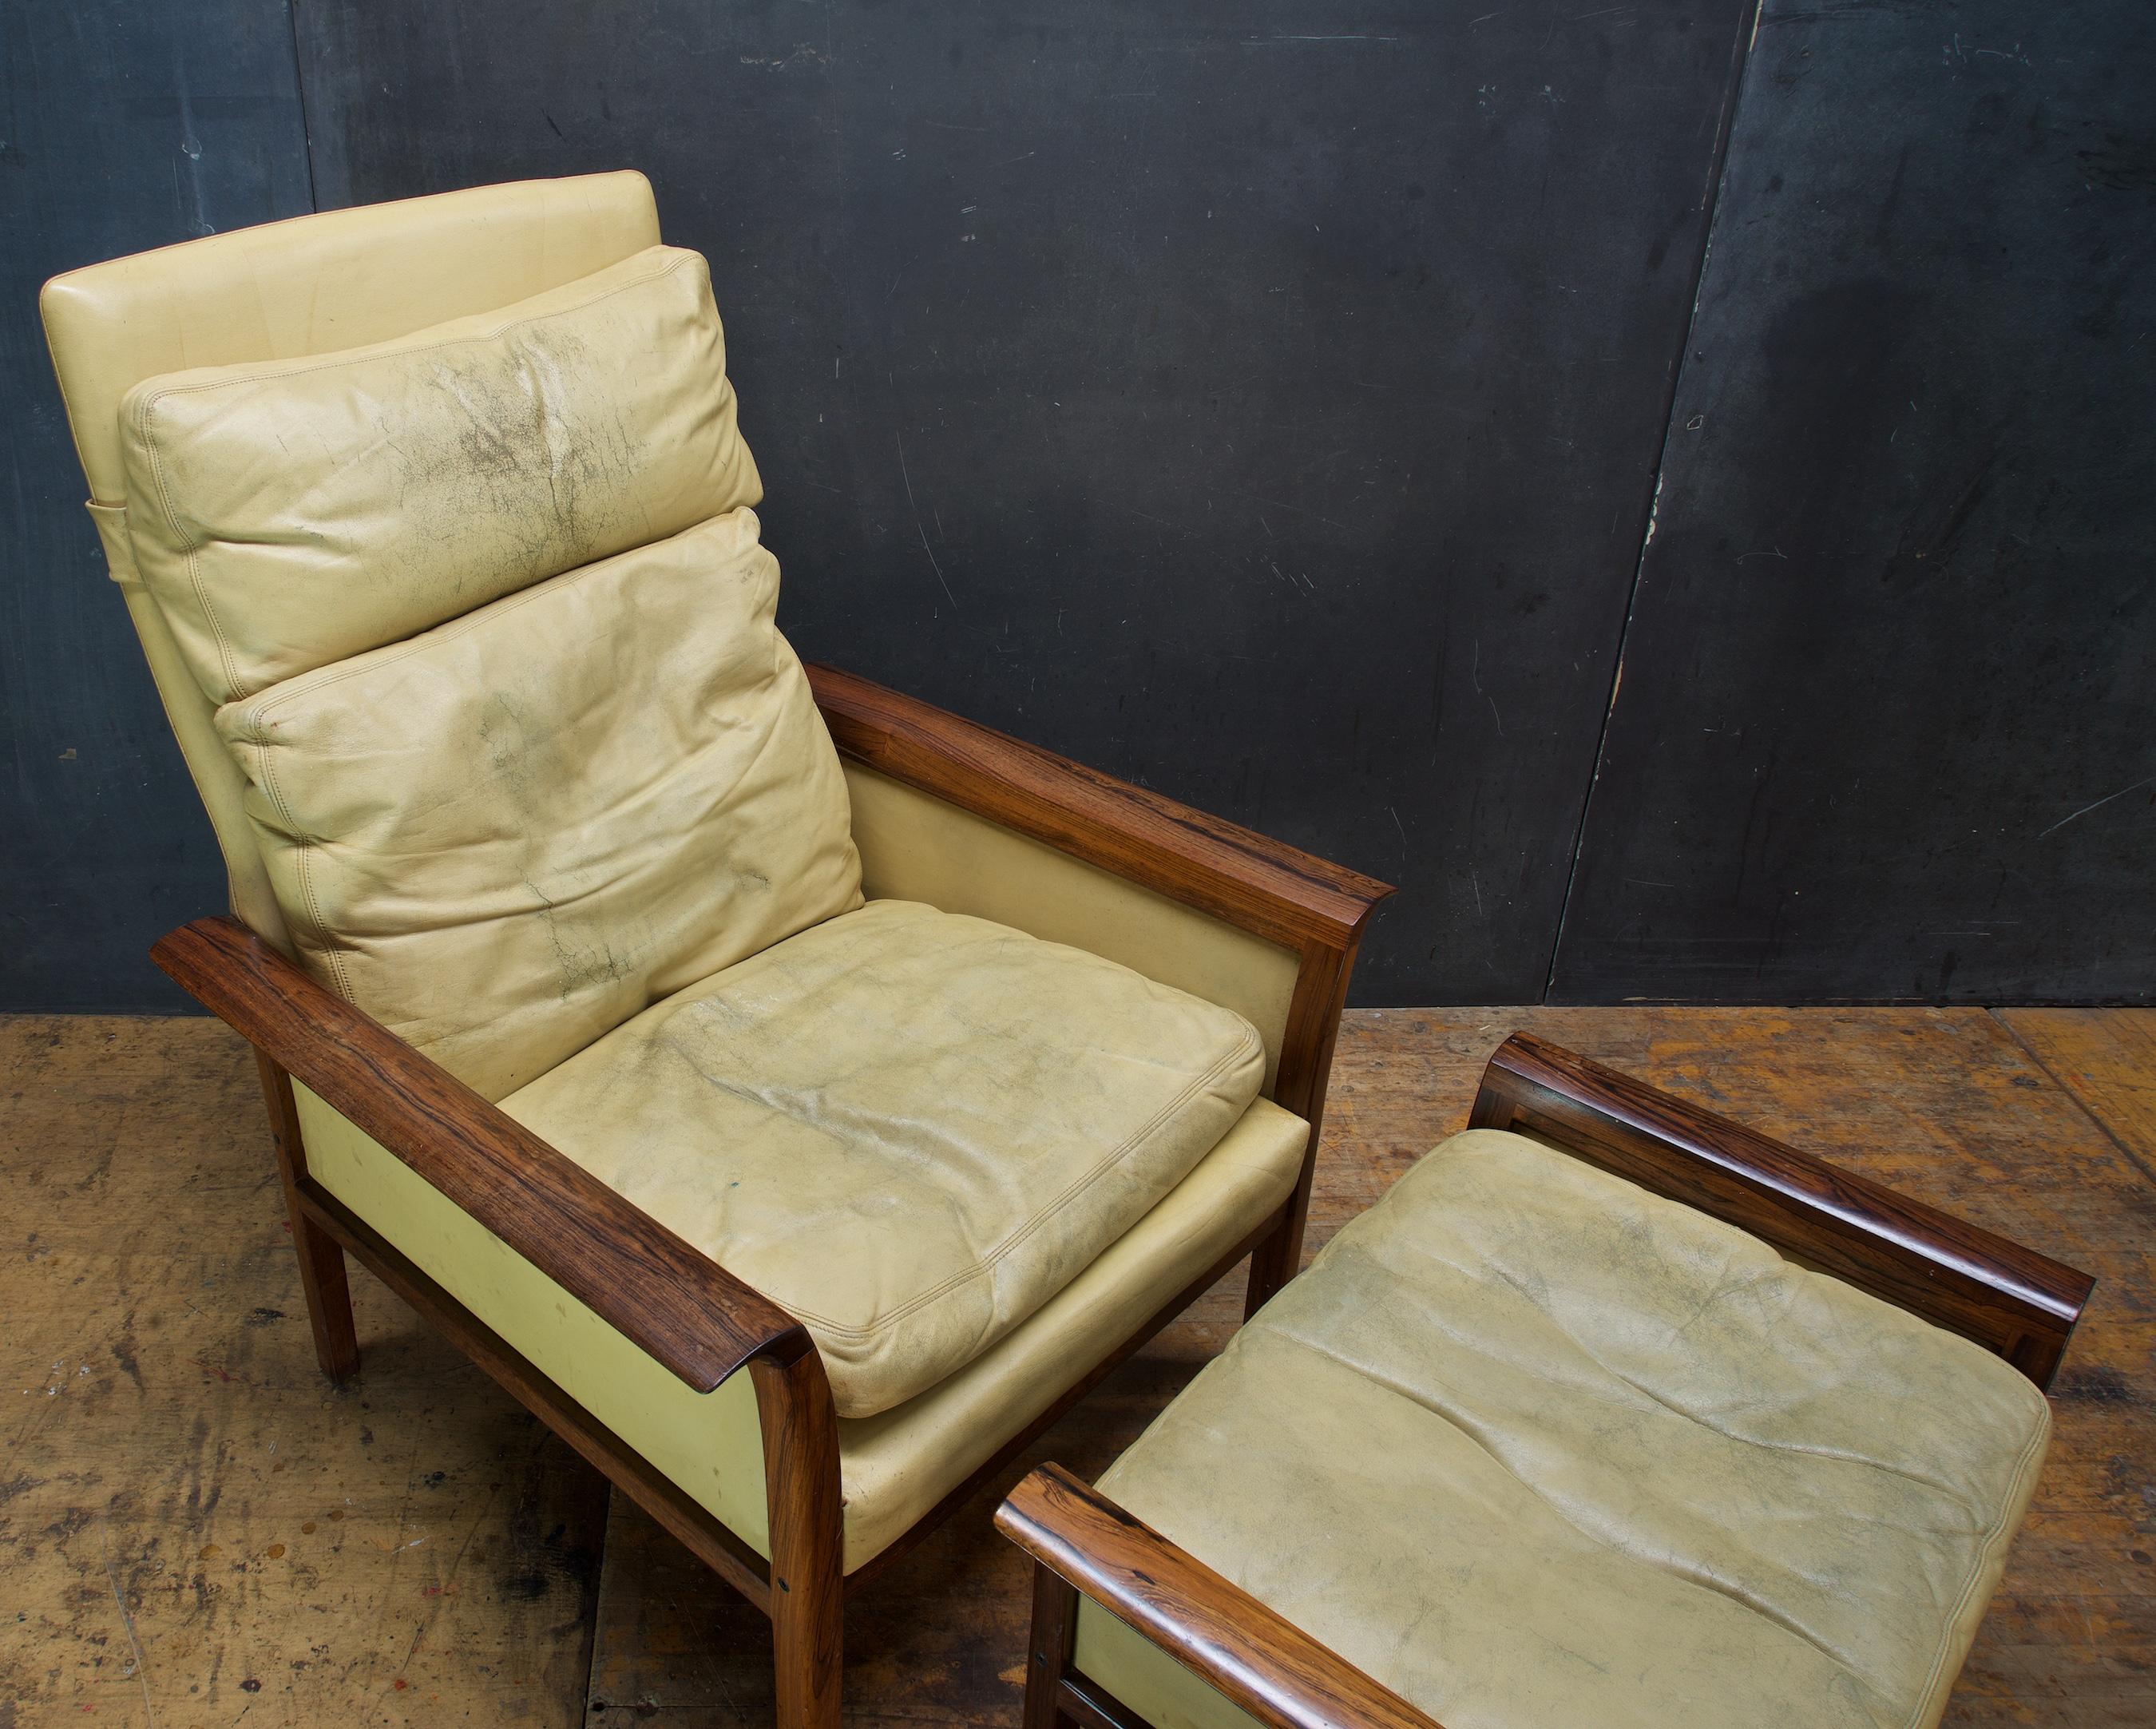 Buttercream Leather and Rosewood Model Nº924 Lounge Chair Ottoman by Knut Sæter for Vatne Mobler of Norway. 

Dingy discolored cream yellow, with some cracking to the top surface of the leather, but no rips or holes. 

Chair W 30 x D 34 x H 39 in. /